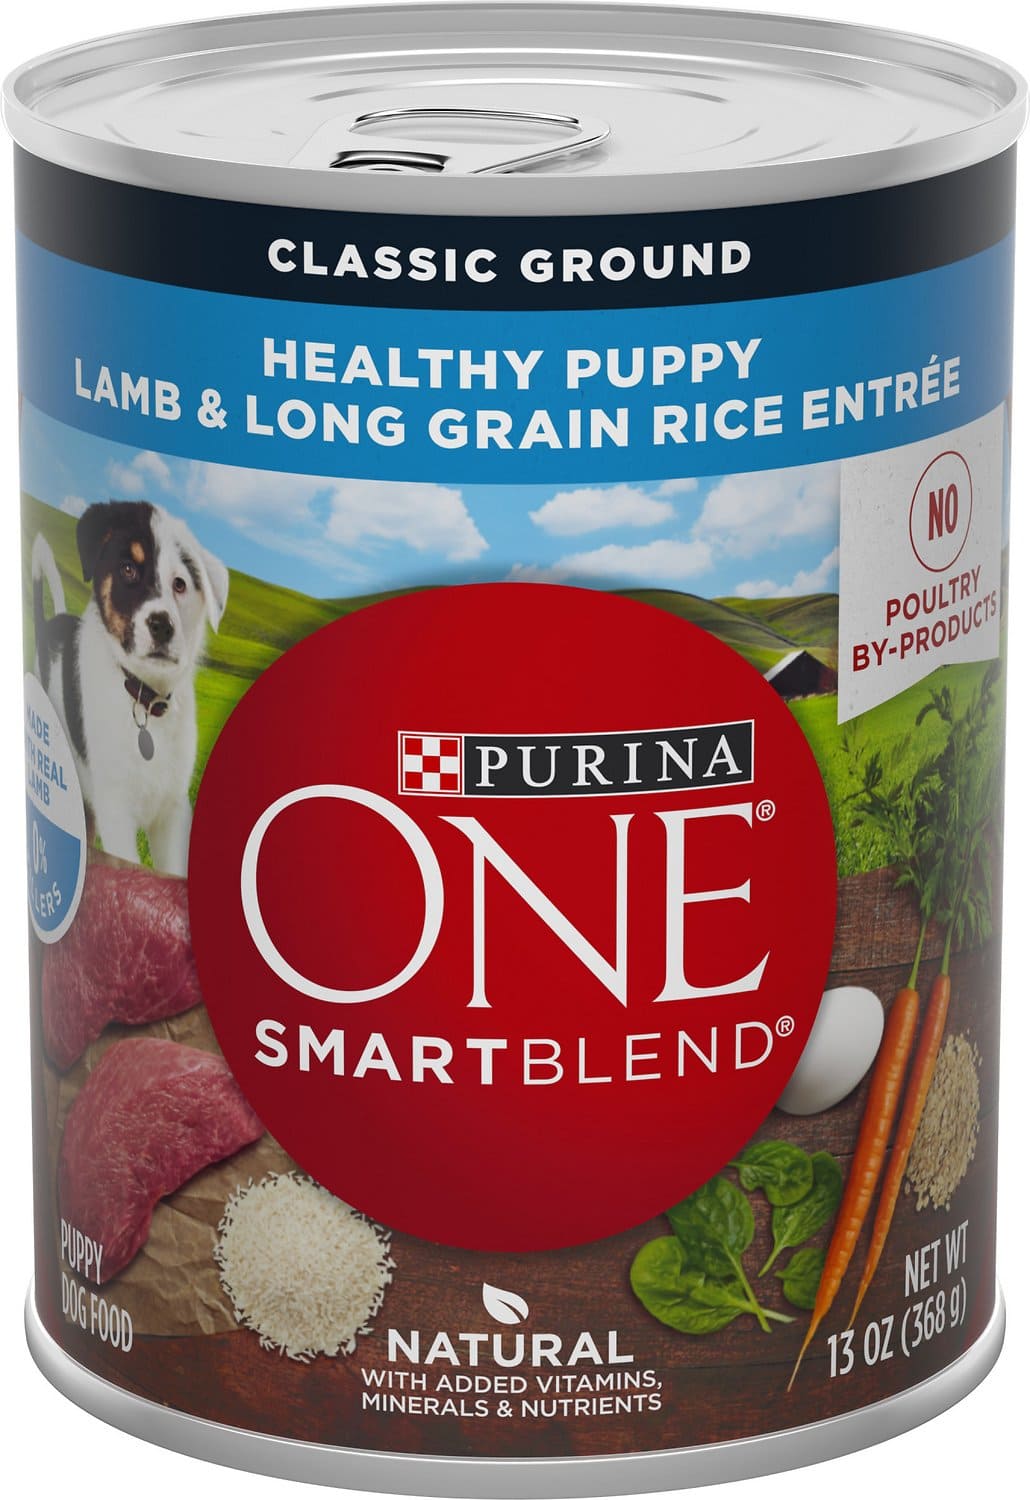 Purina ONE SmartBlend Classic Ground Lamb & Long Grain Rice Entree Canned Puppy Food